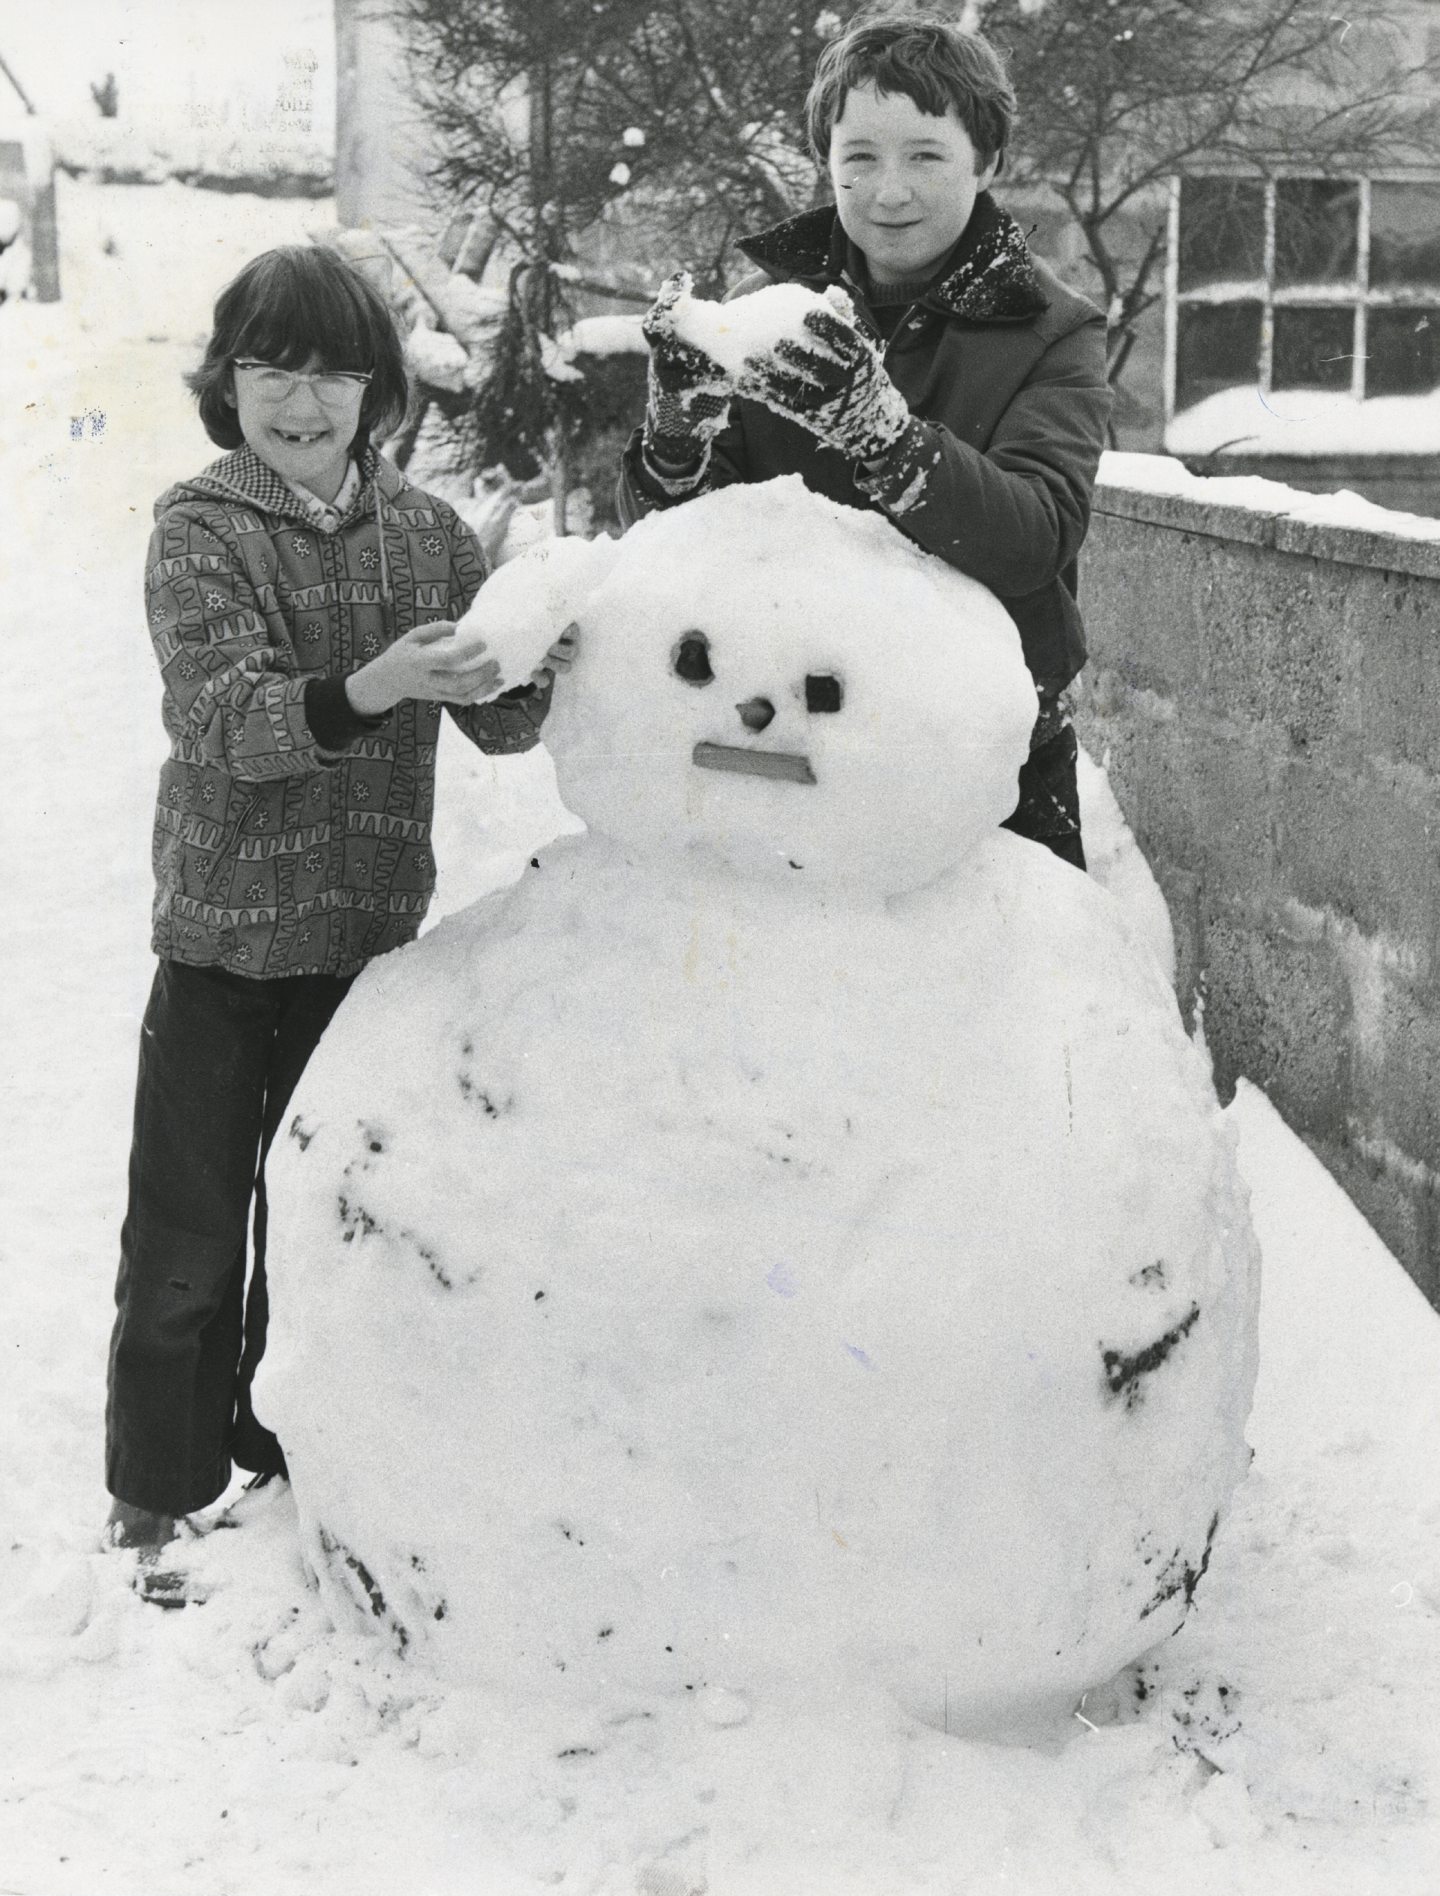 New Pitsligo youngsters Alison and Richard Michie build a giant snowman. Picture: DCT Media.